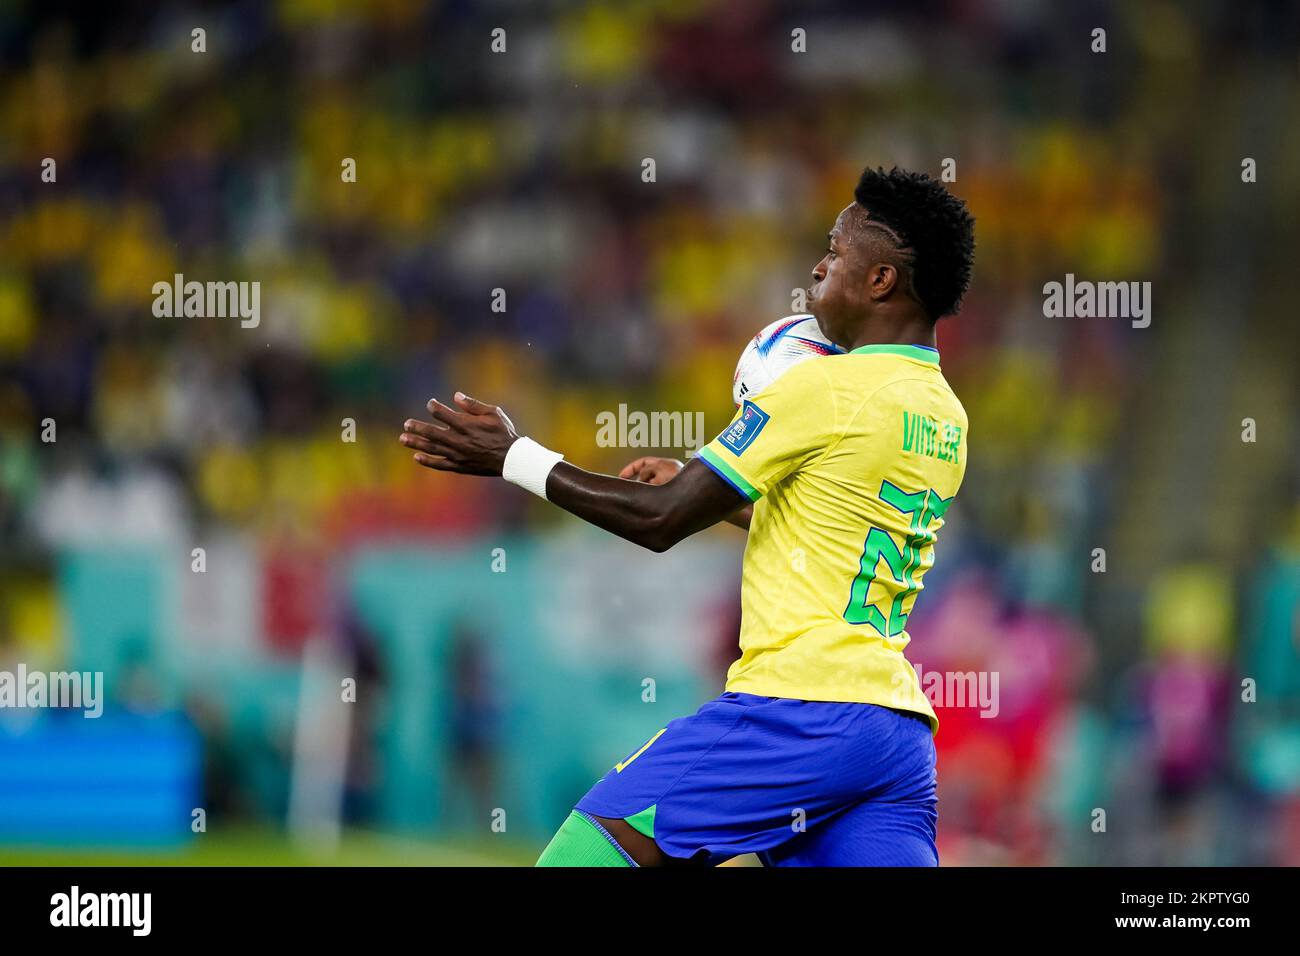 DOHA, QATAR - NOVEMBER 28: Player of Brazil Vinícius Júnior controls the ball during the FIFA World Cup Qatar 2022 group G match between Brazil and Switzerland at Stadium 974 on November 28, 2022 in Doha, Qatar. (Photo by Florencia Tan Jun/PxImages) Stock Photo